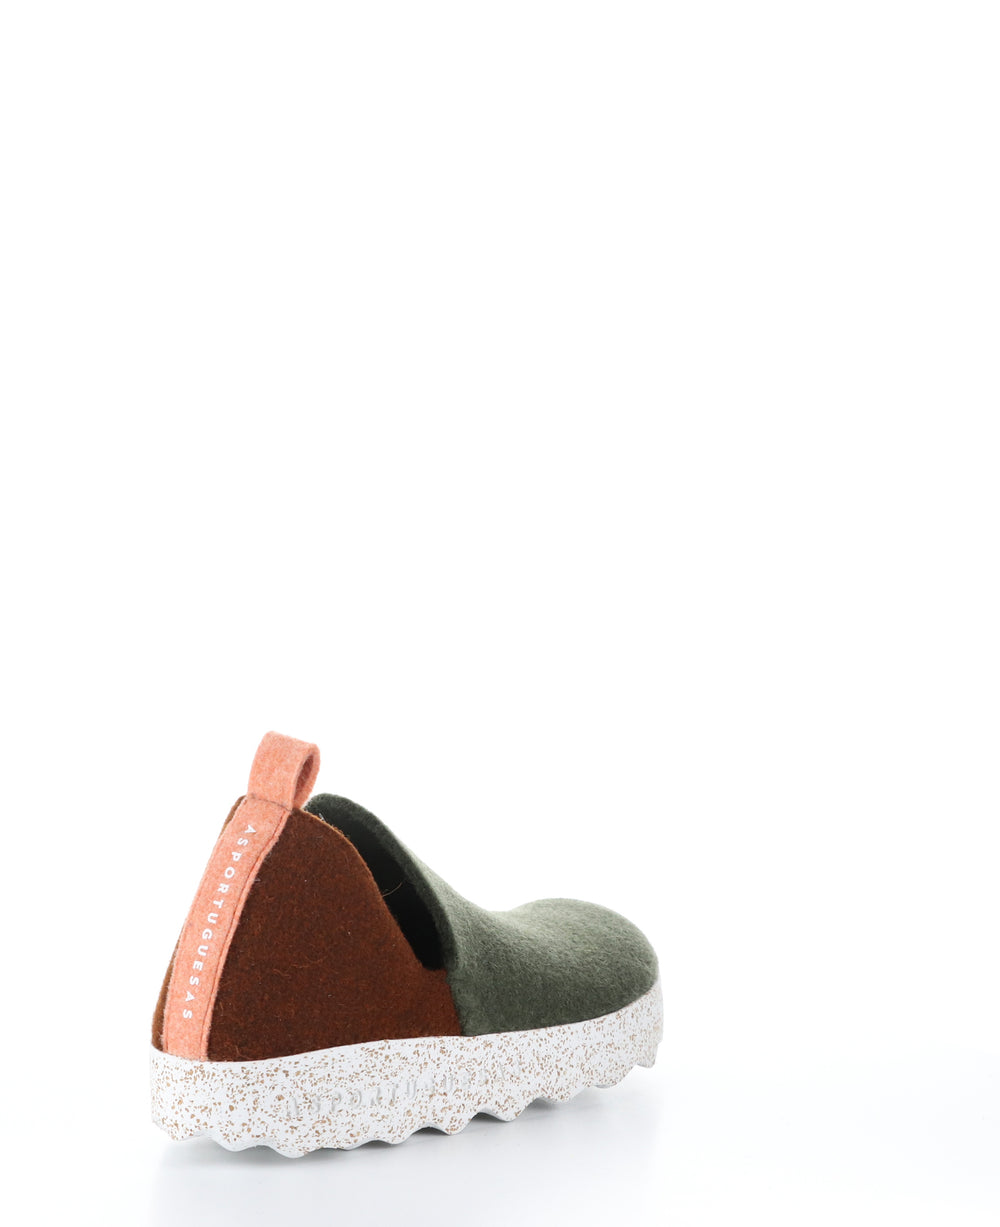 CITY089ASPM Mgreen/Brn/Tang Round Toe Shoes|CITY089ASPM Chaussures à Bout Rond in Vert